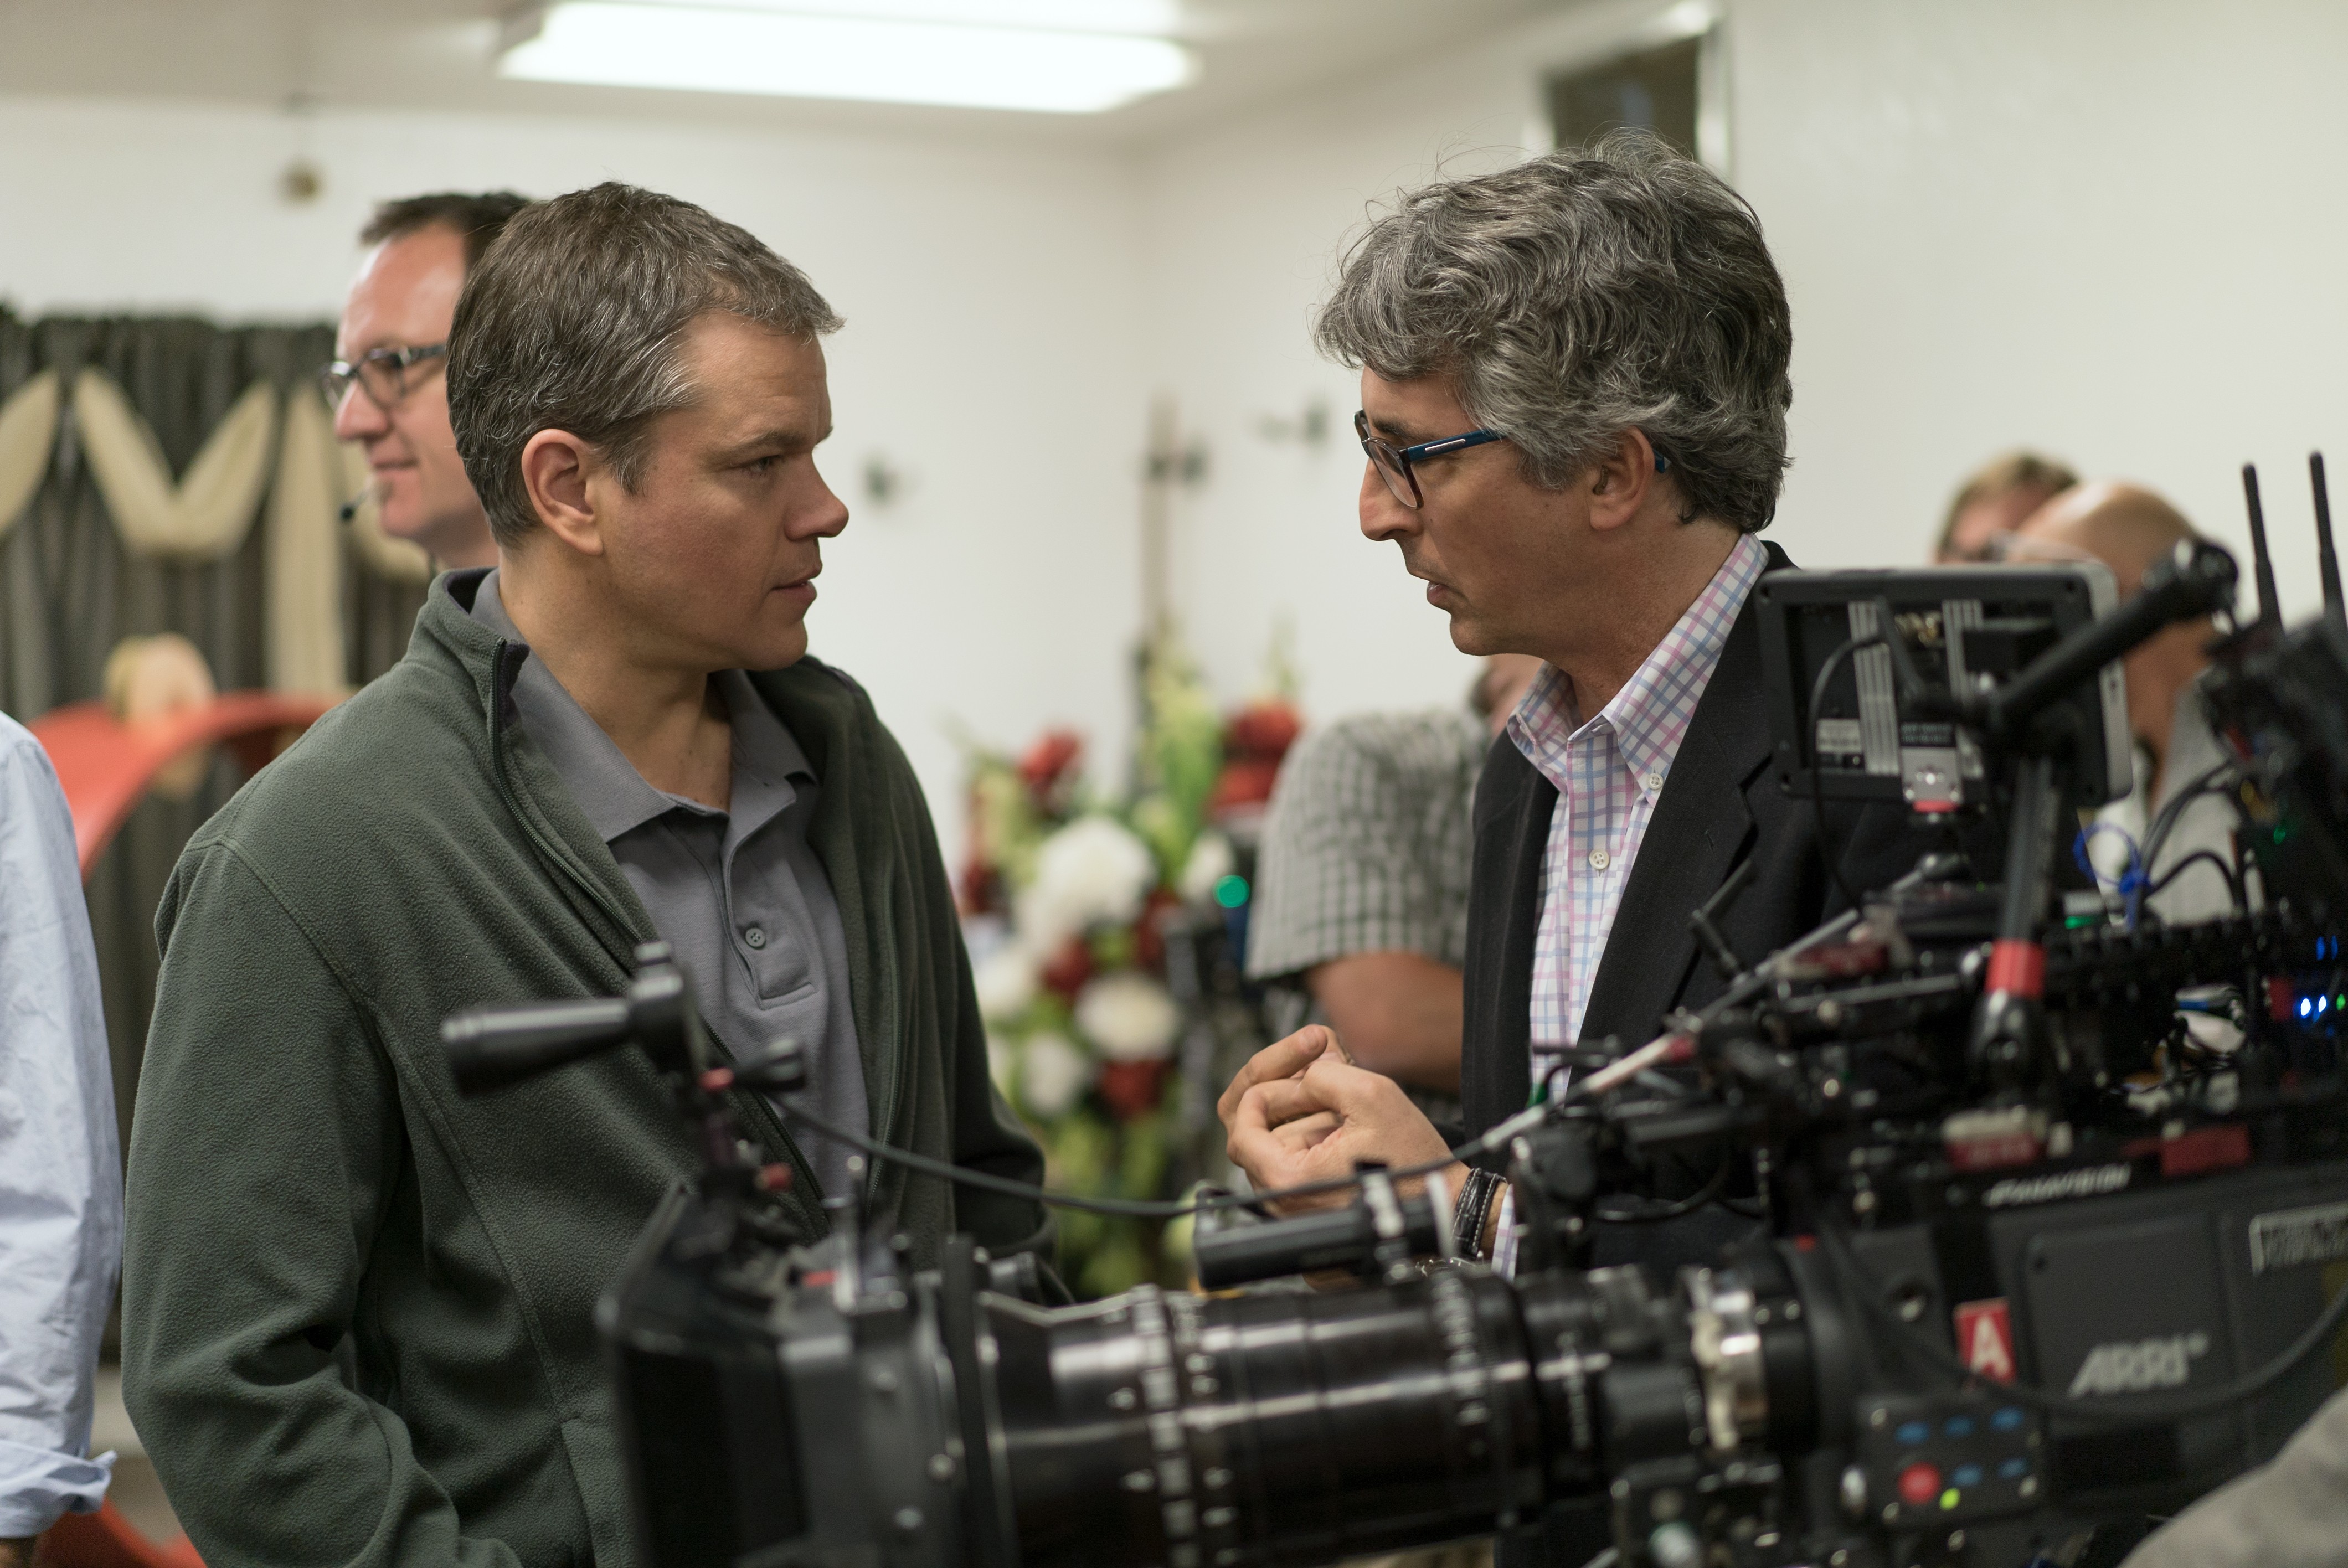 The opening night film this year will be the latest dramedy by Alexander Payne, "Downsizing," starring Matt Damon. Producer and VFF board chairman Mark Johnson will be featured in a conversation after the screening.